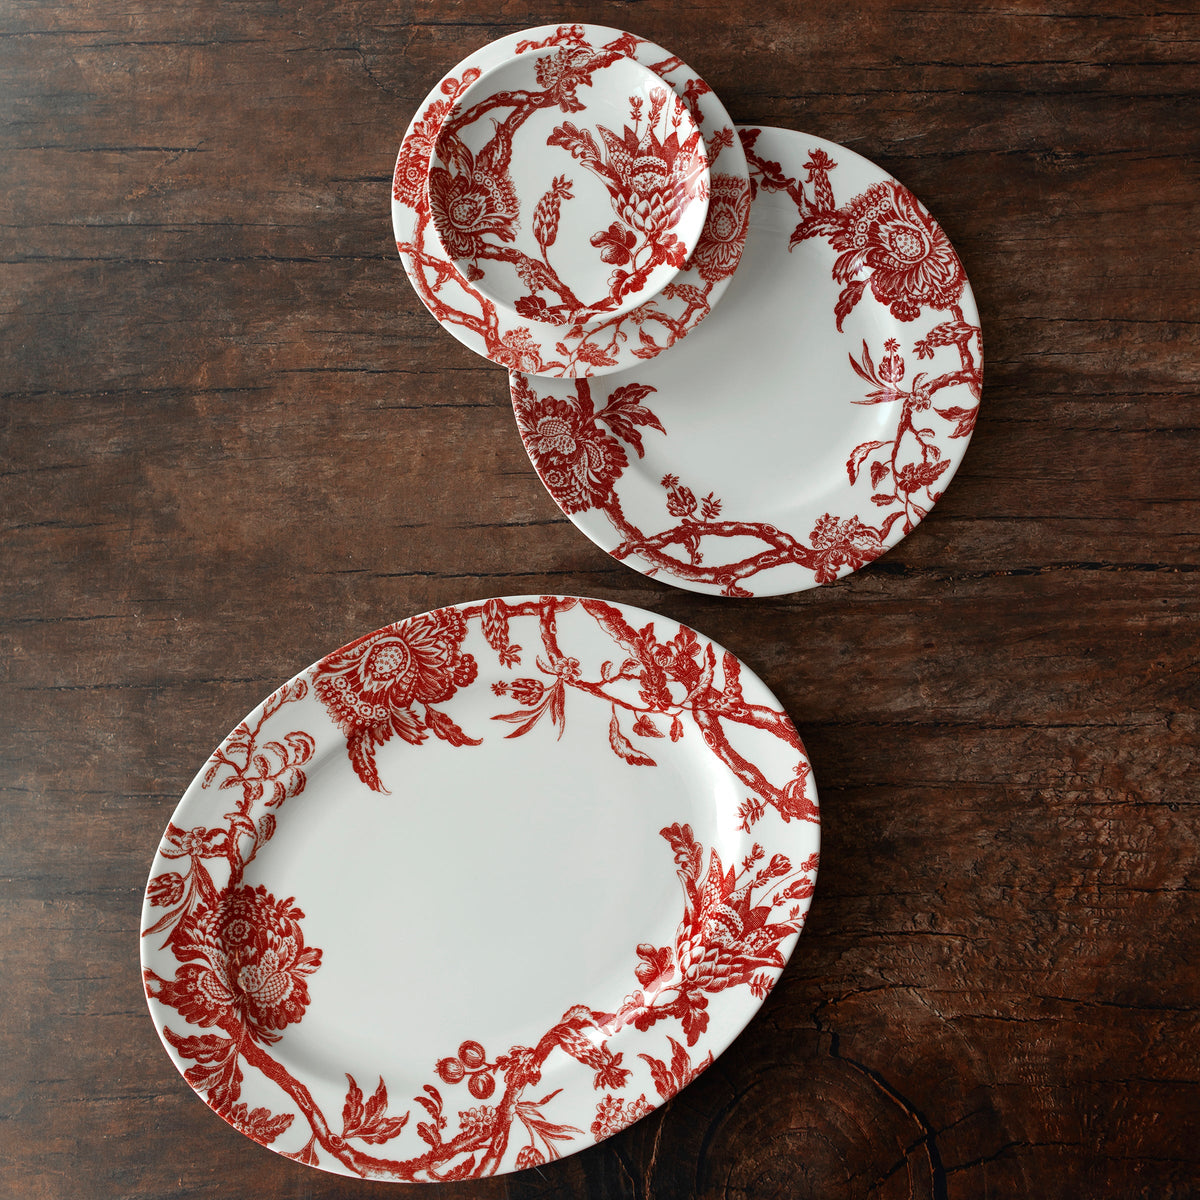 The Arcadia Crimson Collection from Caskata also includes serving pieces including a large oval platter.